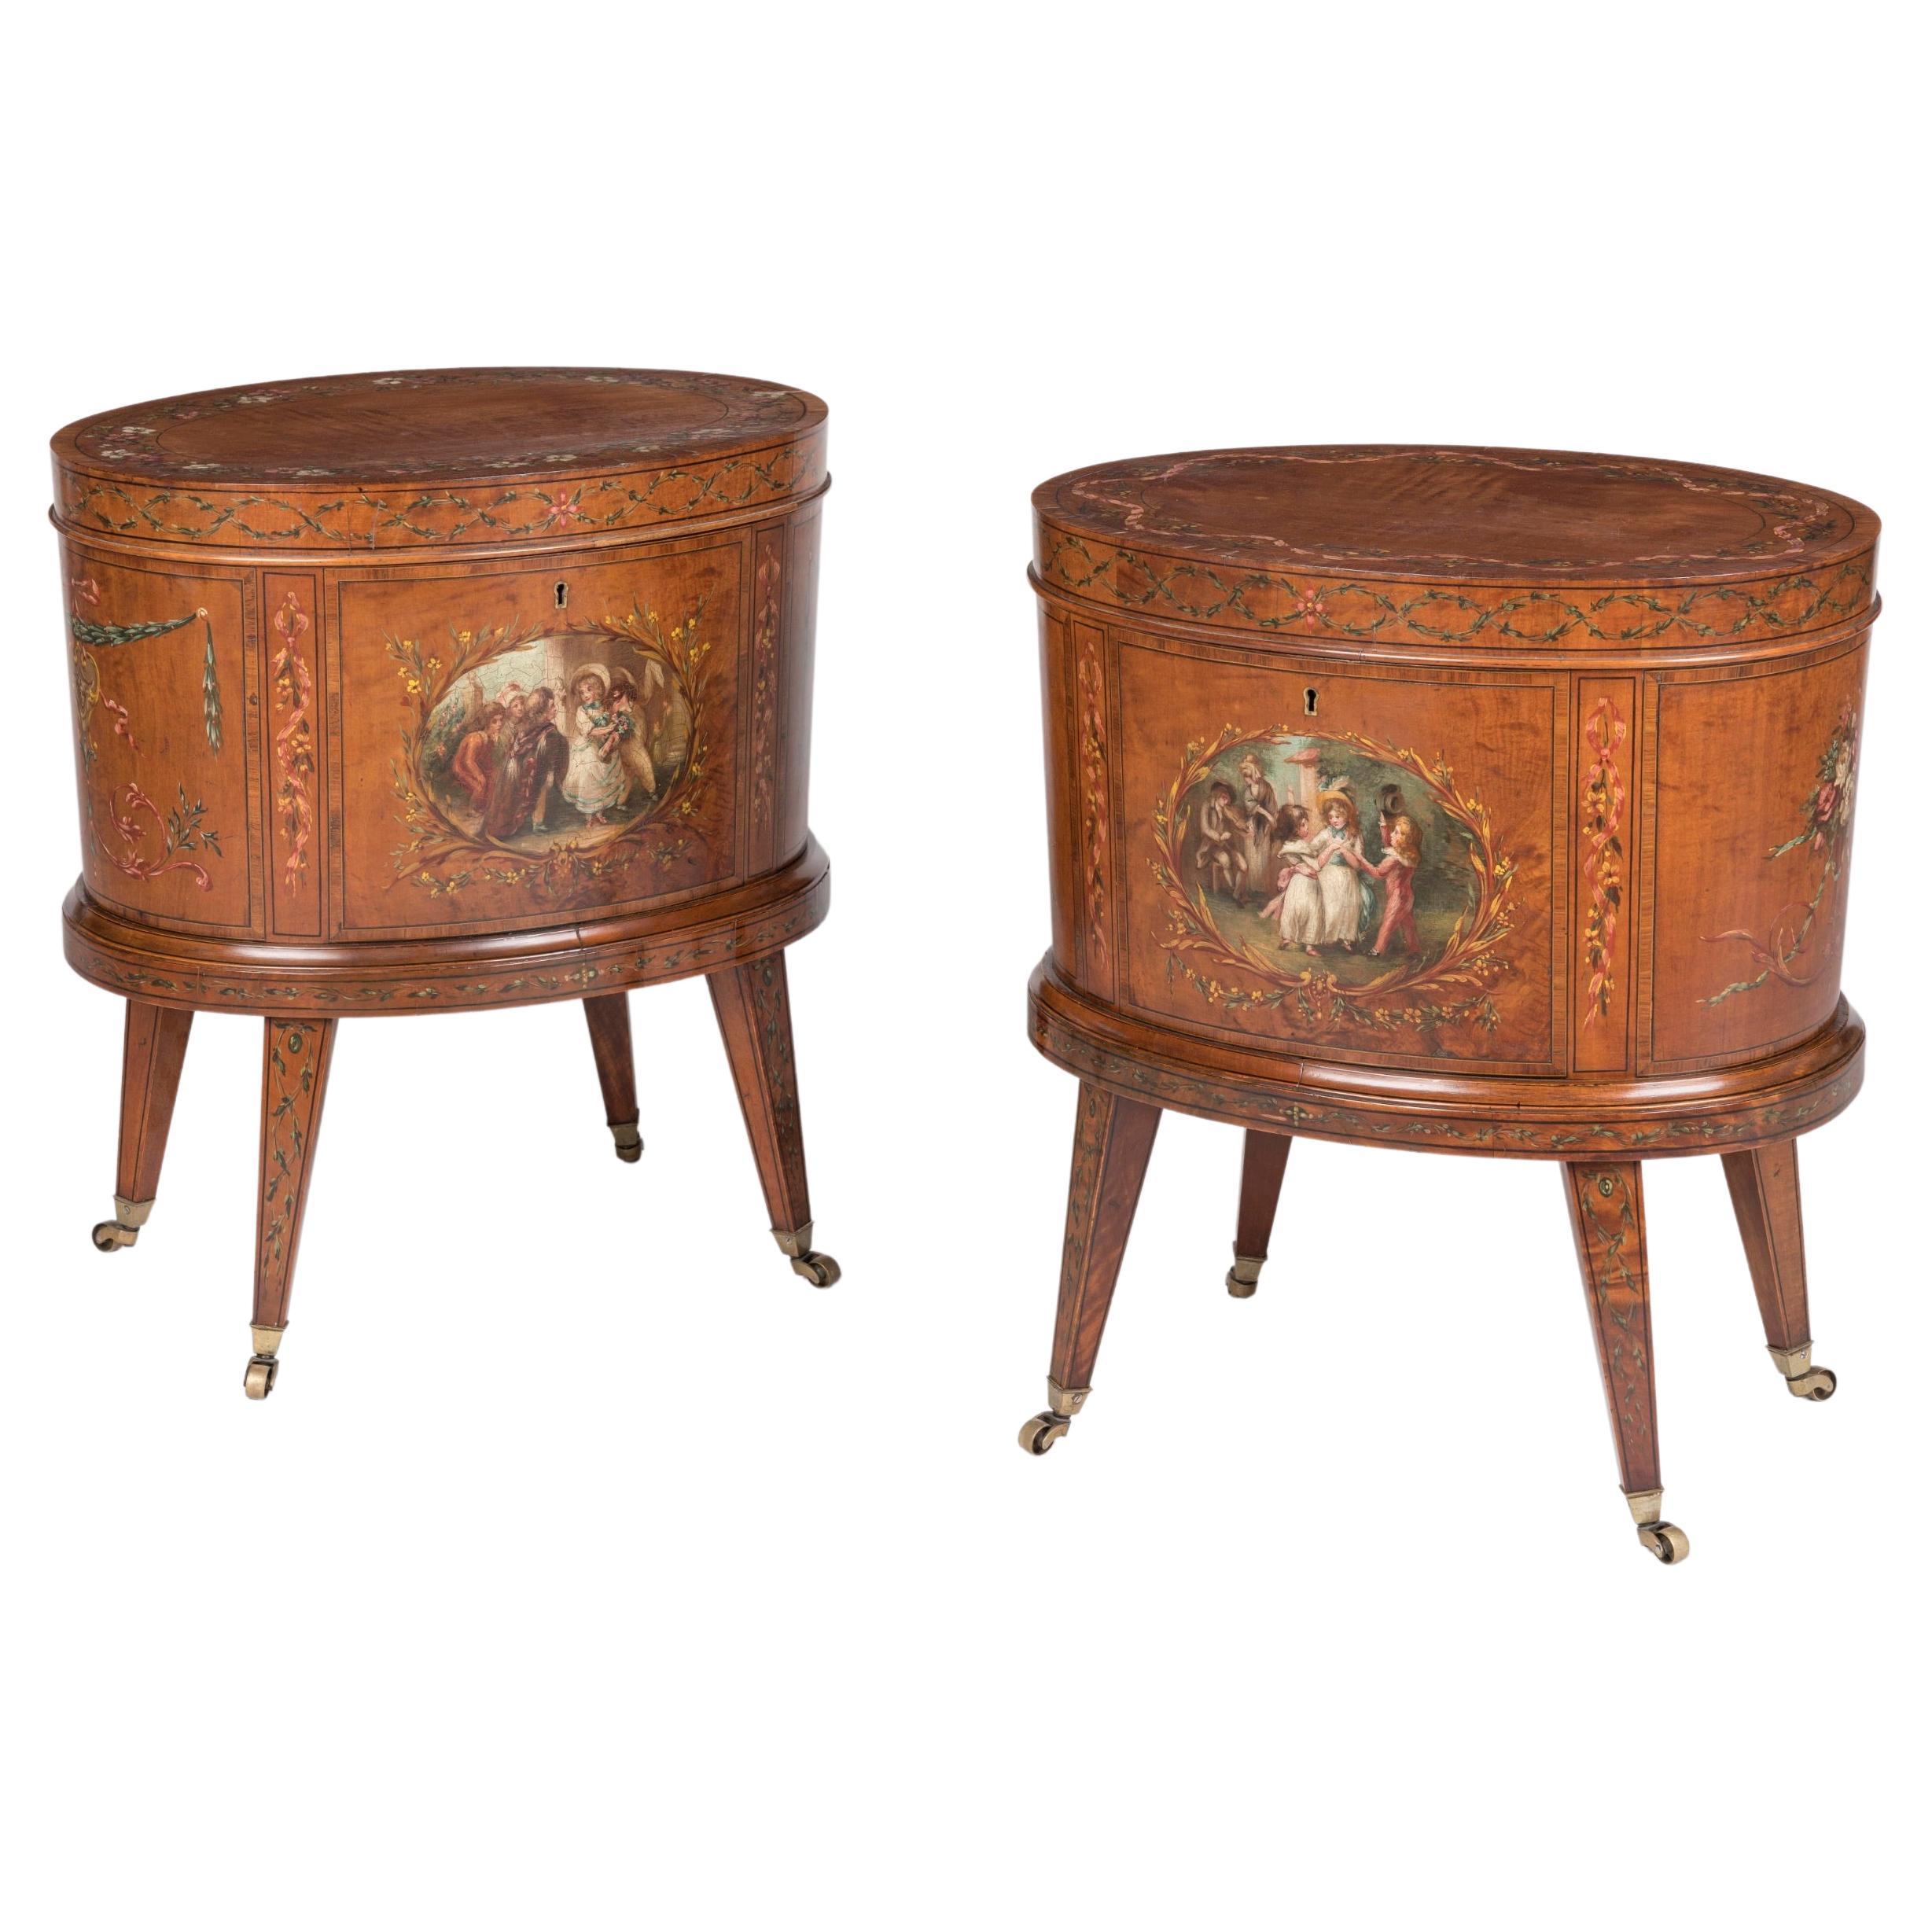 Rare Pair of 19th Century Neoclassical Hand-Painted Satinwood Wine Coolers For Sale